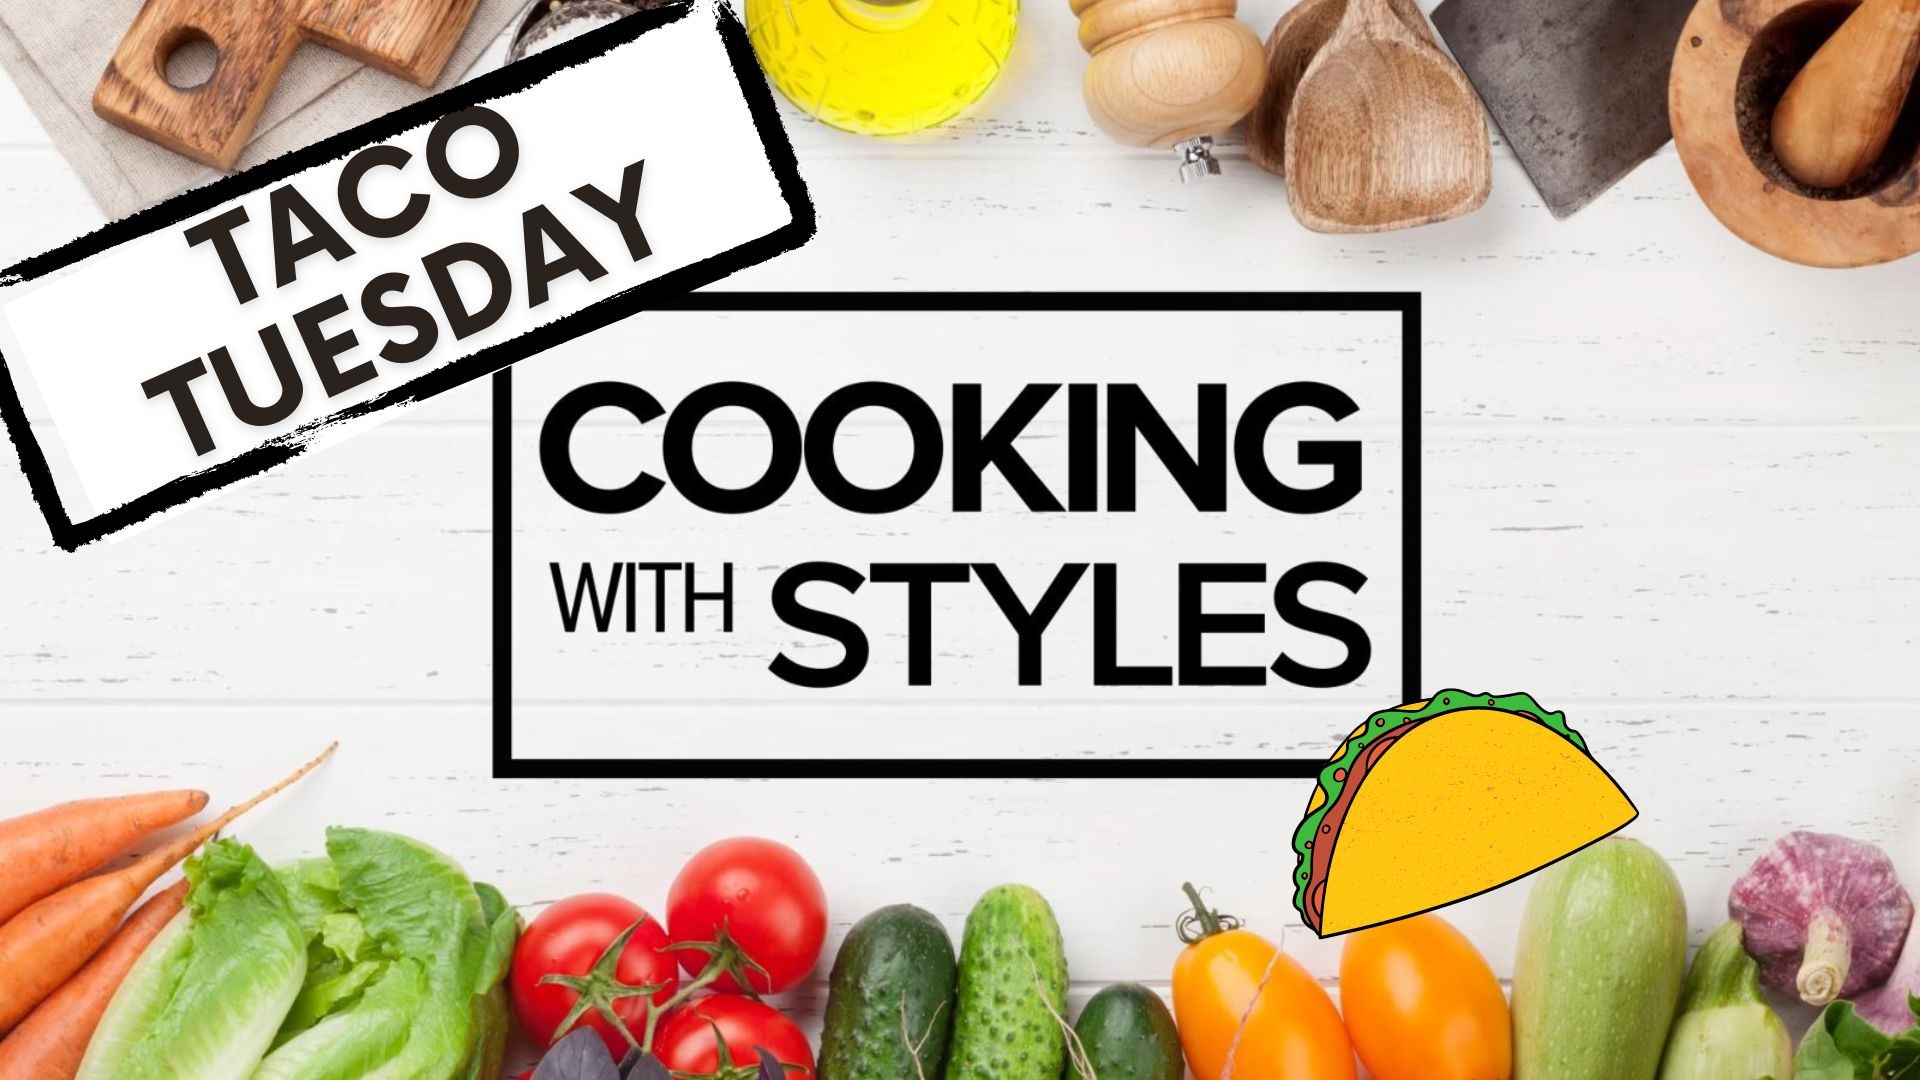 KFMB's Shawn Styles shares different recipes to make your next Taco Tuesday memorable, from salsa and guacamole to lettuce wrapped tacos and fajitas.